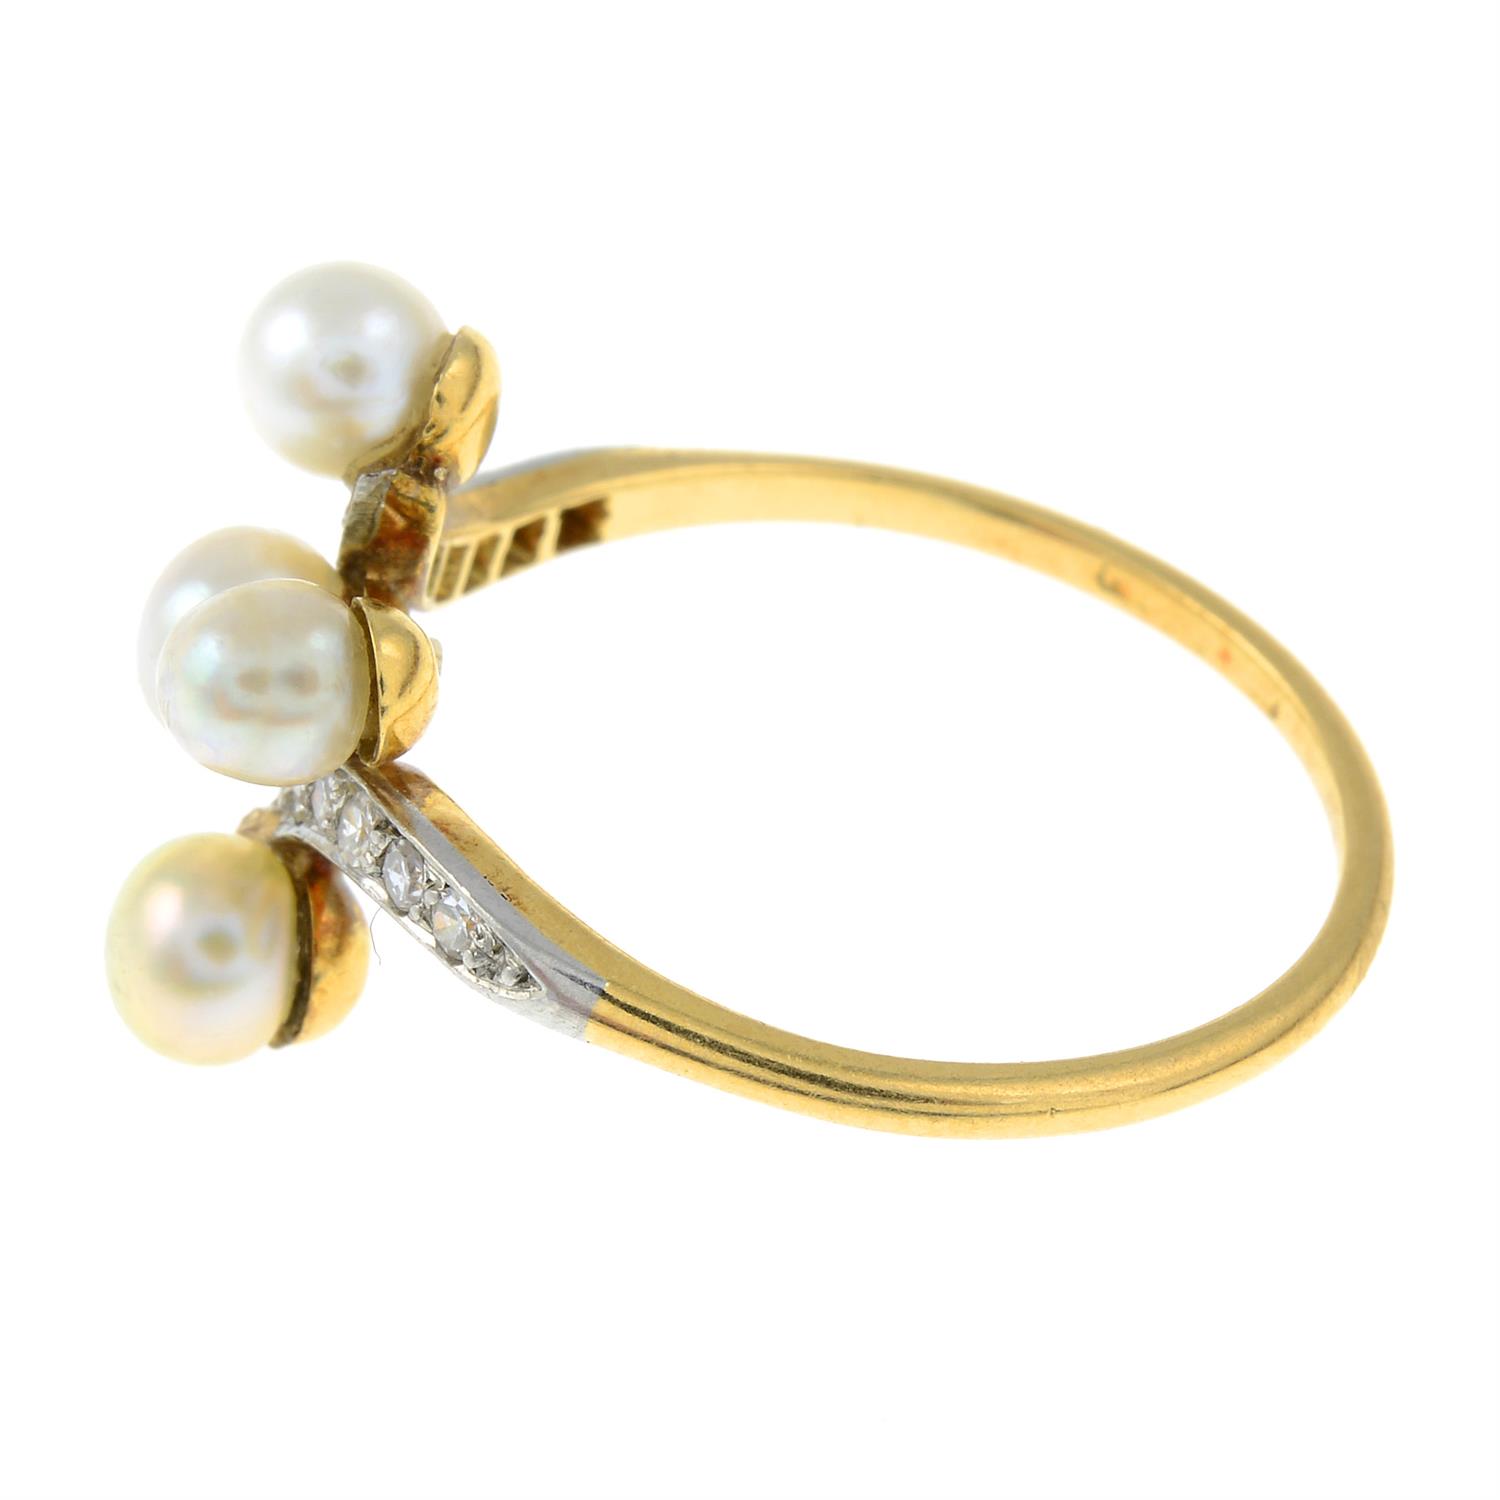 An early 20th century 18ct gold and platinum, cultured pearl and diamond ring. - Image 2 of 3